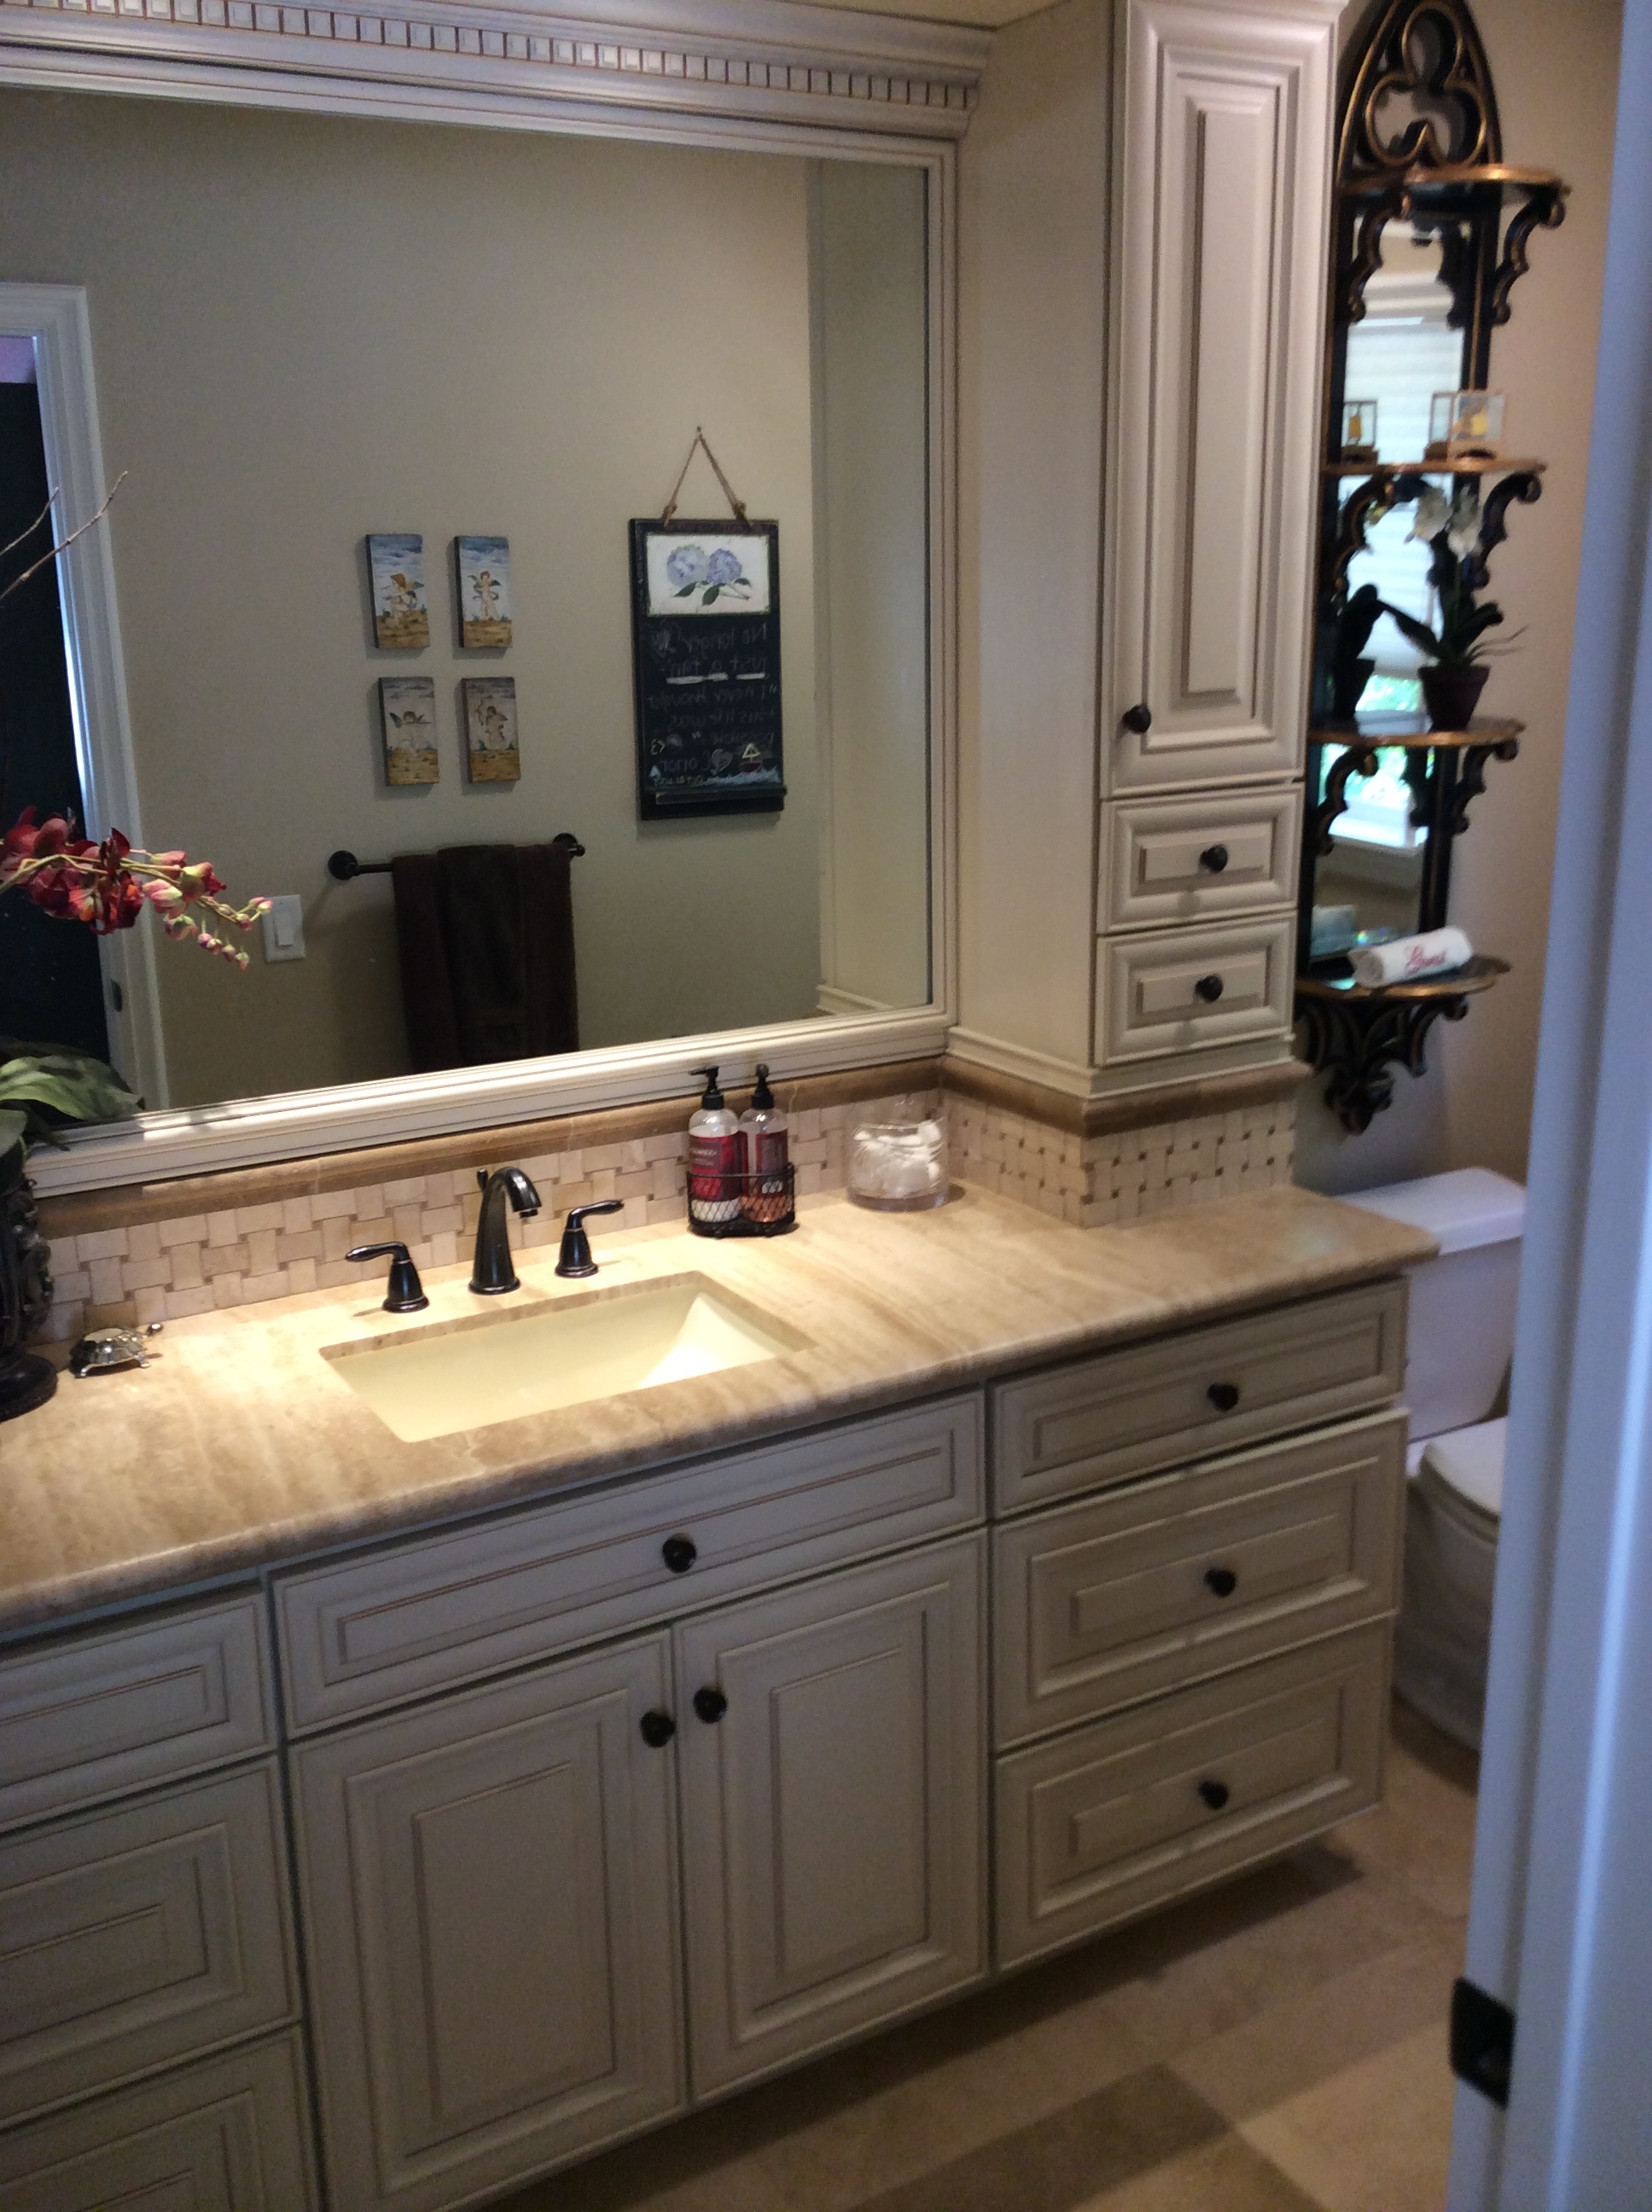 Bathroom Remodel by North-West Construction Grass Valley, CA